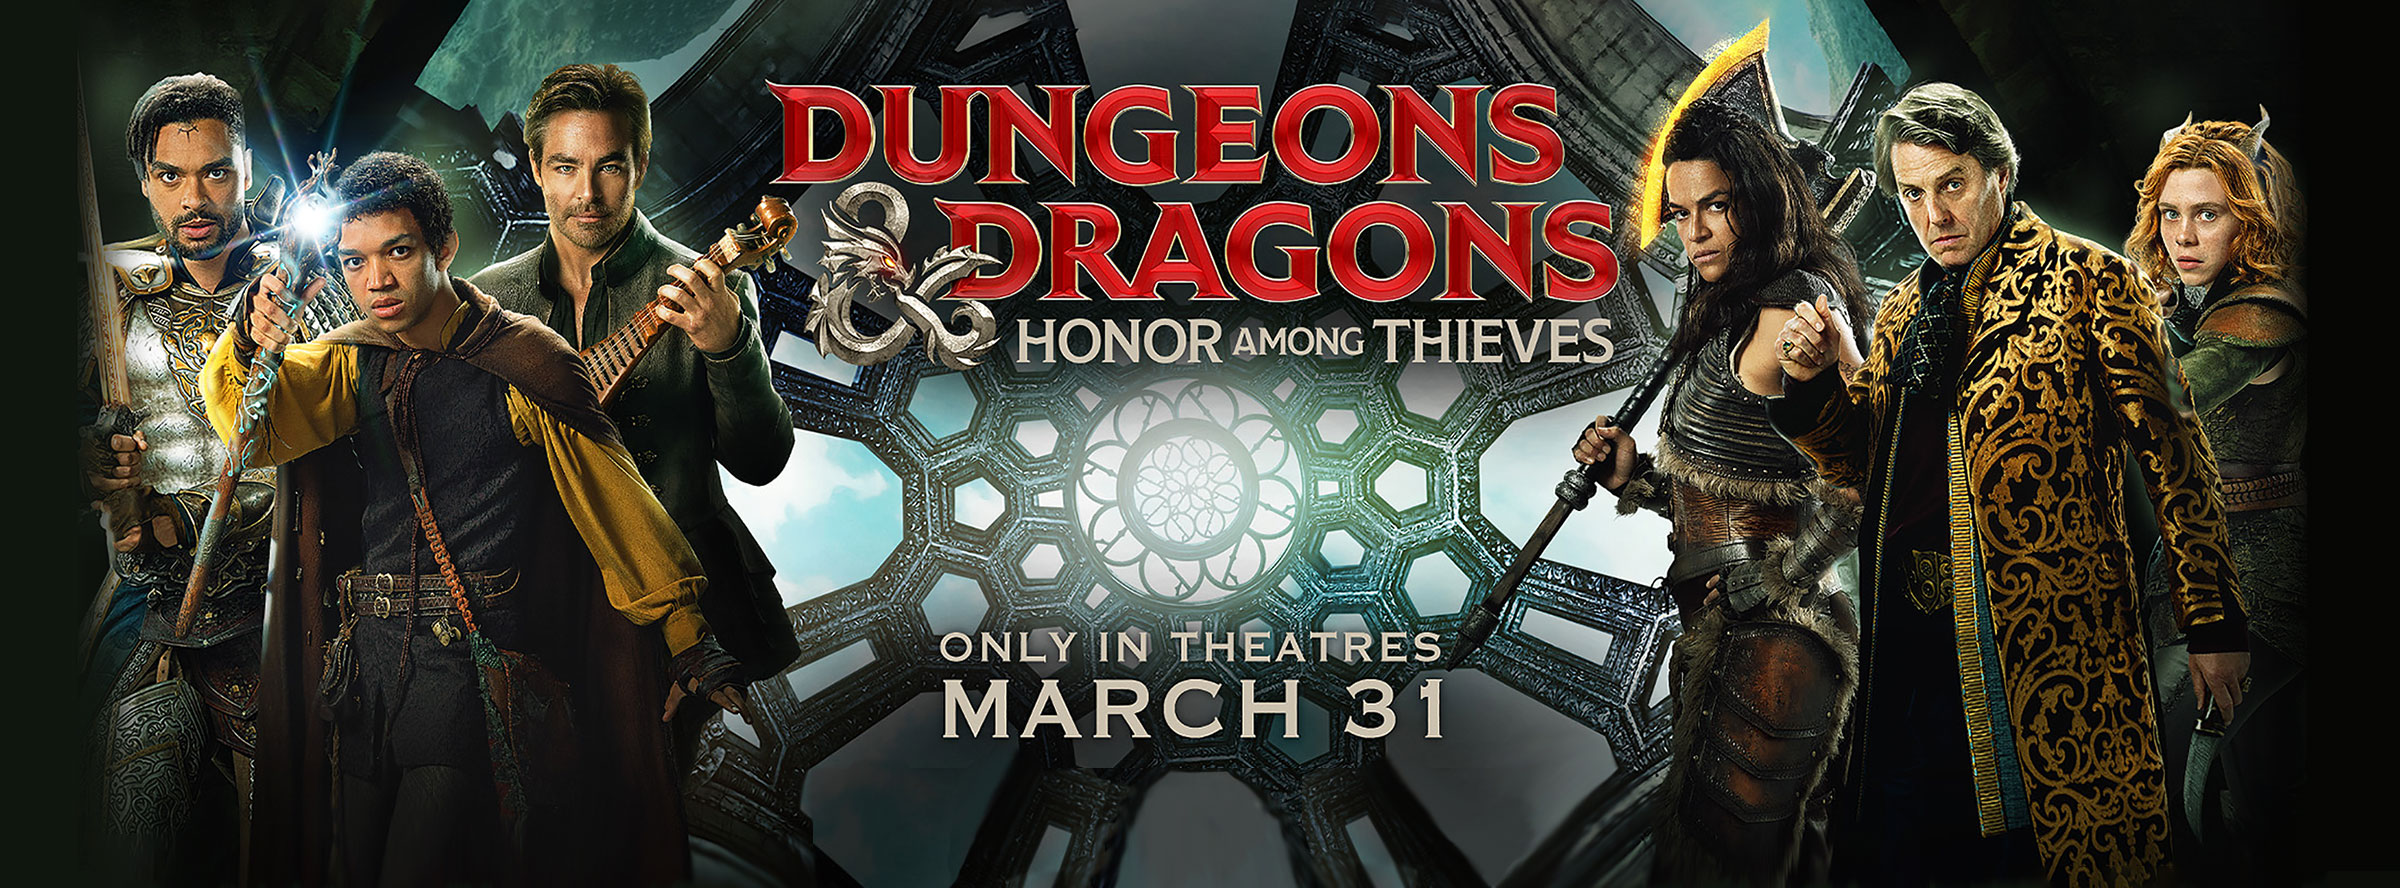 dungeons-and-dragons-honor-among-thieves